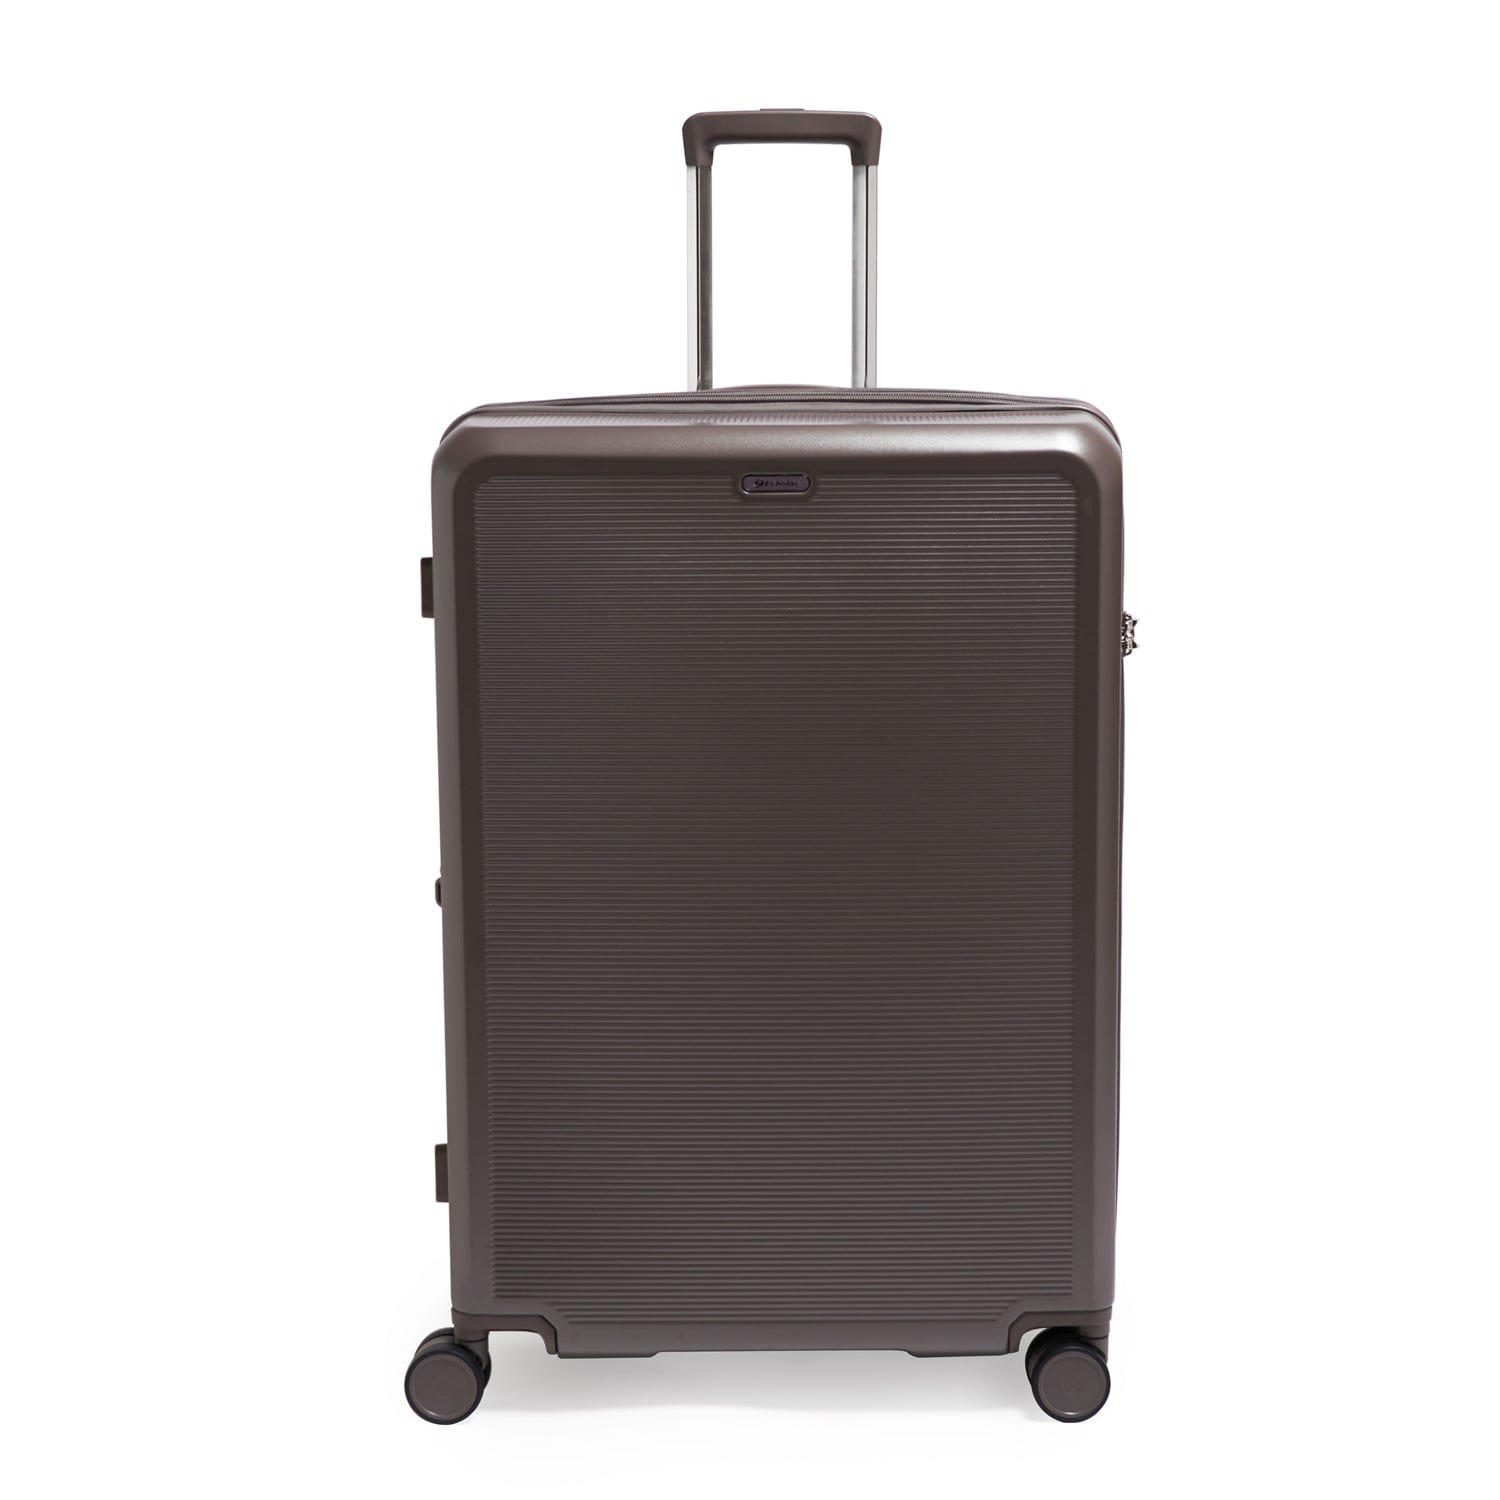 Echolac Sense 78cm Hardcase Expandable 4 Double Wheel Check-In Luggage Trolley Brown - CHT0023S -28 Brown